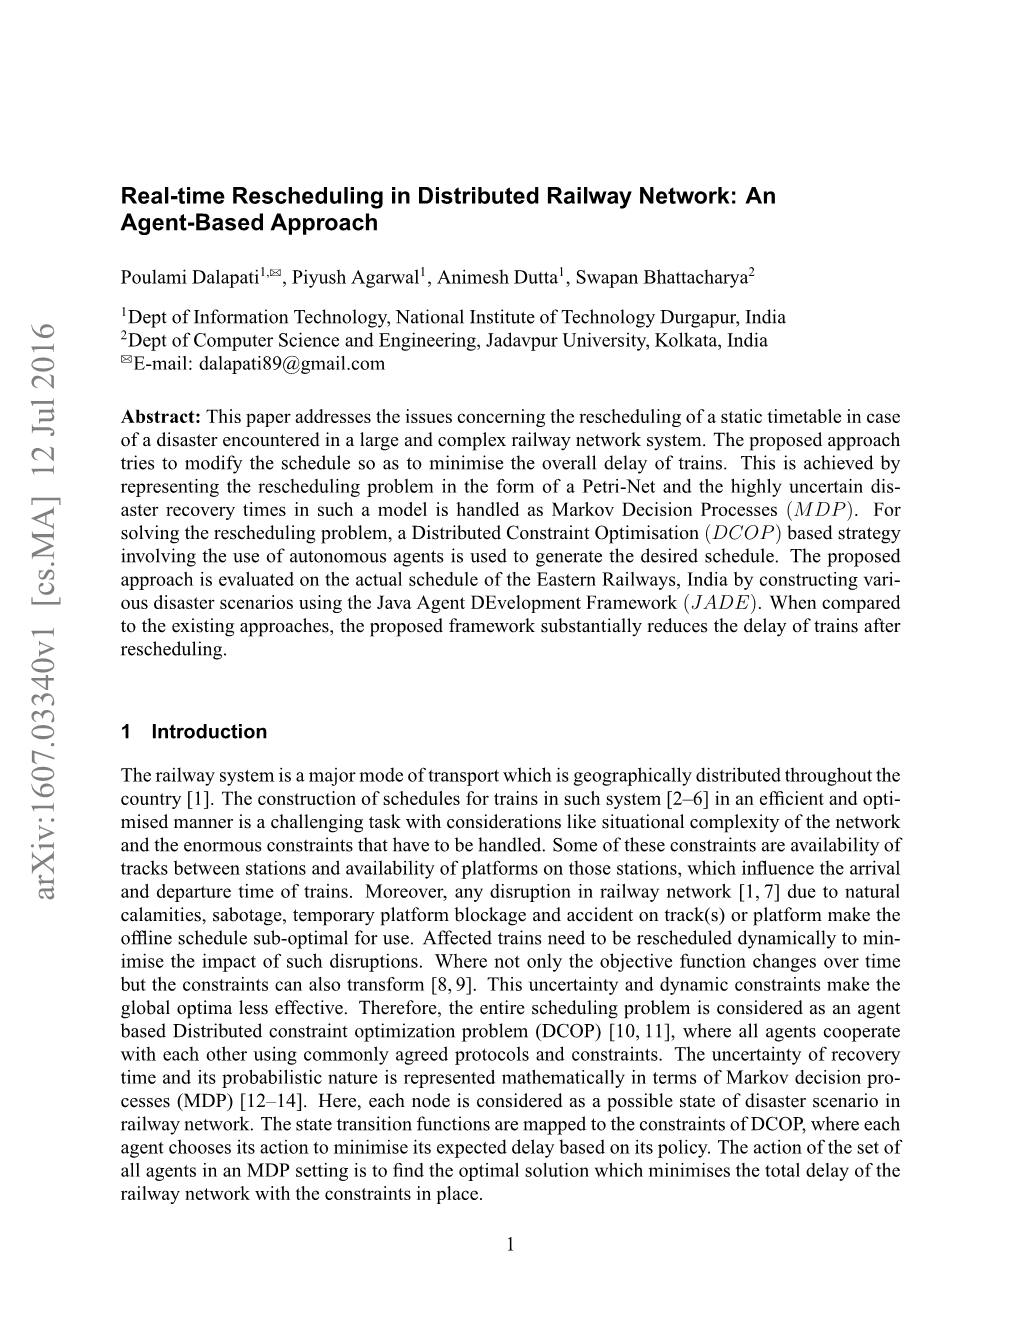 Real-Time Rescheduling in Distributed Railway Network: an Agent-Based